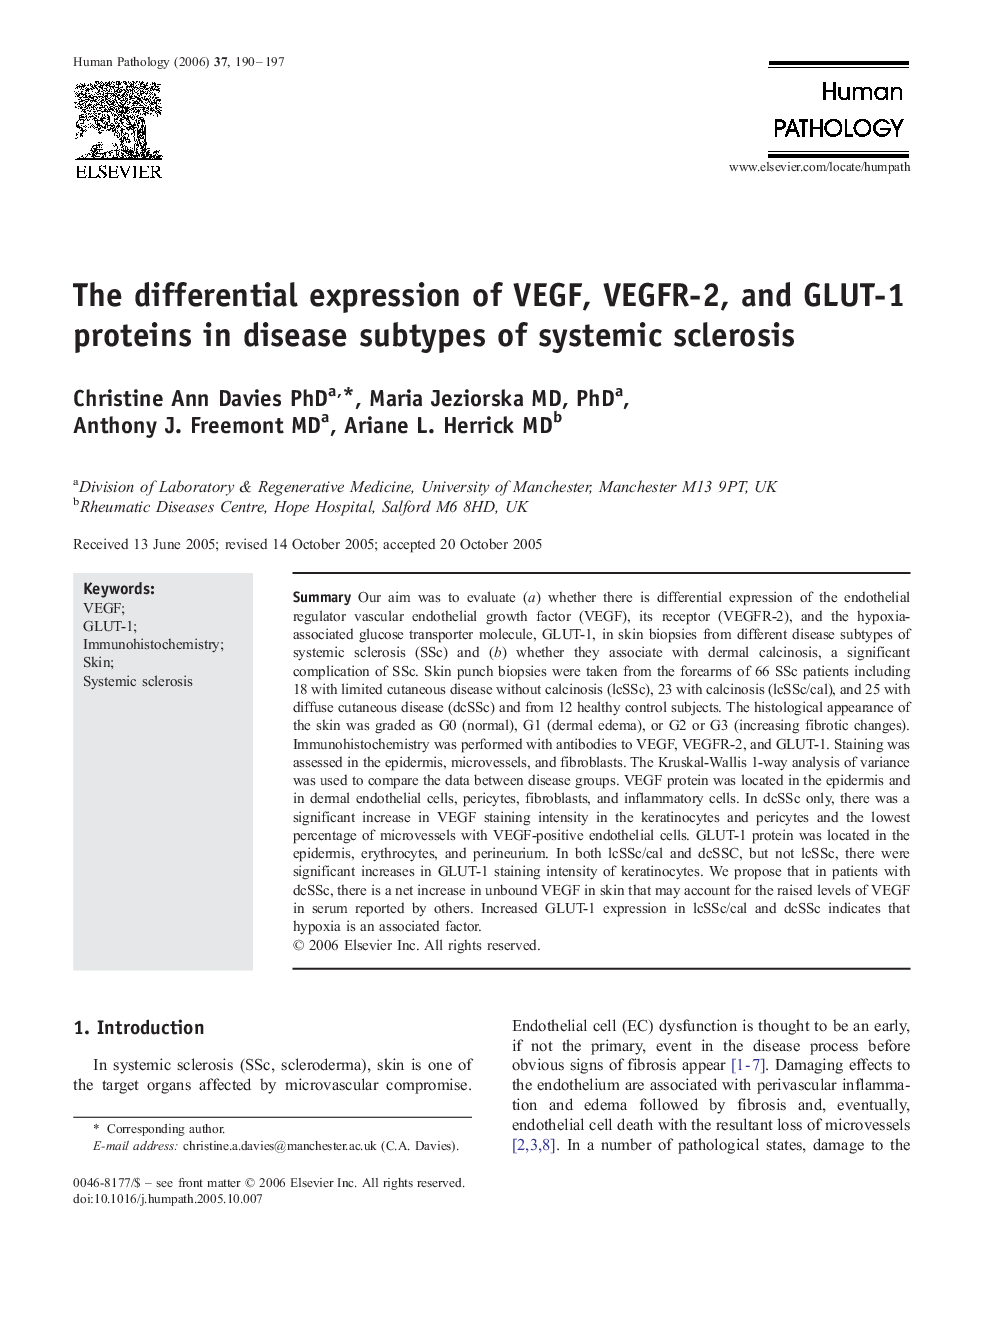 The differential expression of VEGF, VEGFR-2, and GLUT-1 proteins in disease subtypes of systemic sclerosis